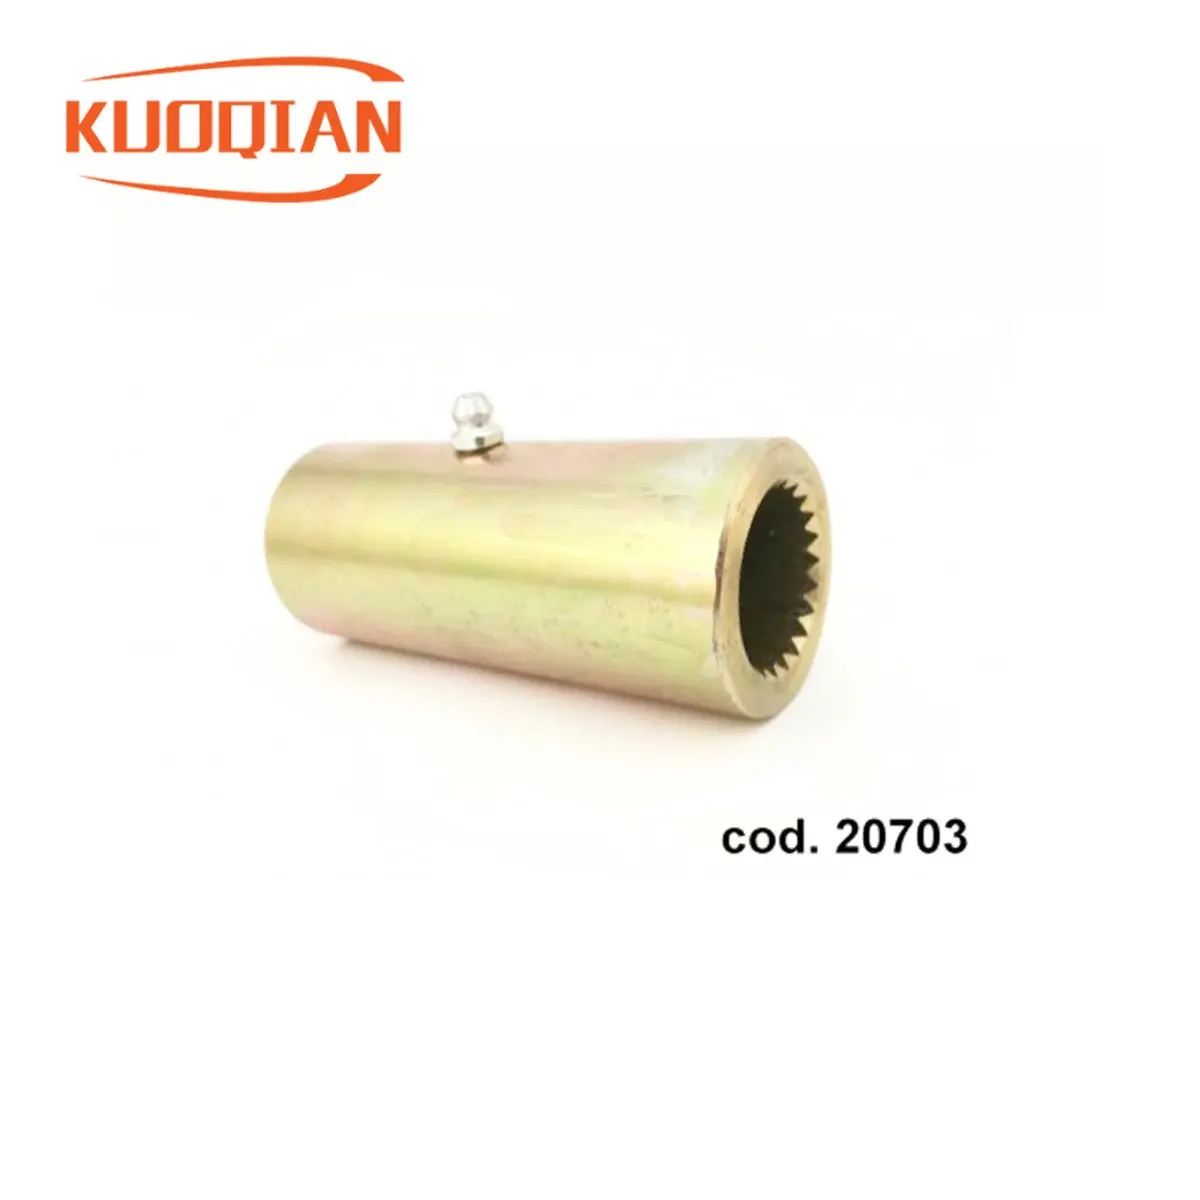 COUPLING-PROP SHAFT GREASED For buyang Linhai ATV 300-3D SWINGARM ASSY 20703 3.1.01.0030 REAR CARDAN JOINT class 21 25 3 5cc methanol boat engine shaft joint soft shaft lock coupling 1 4 28 tooth 4 76